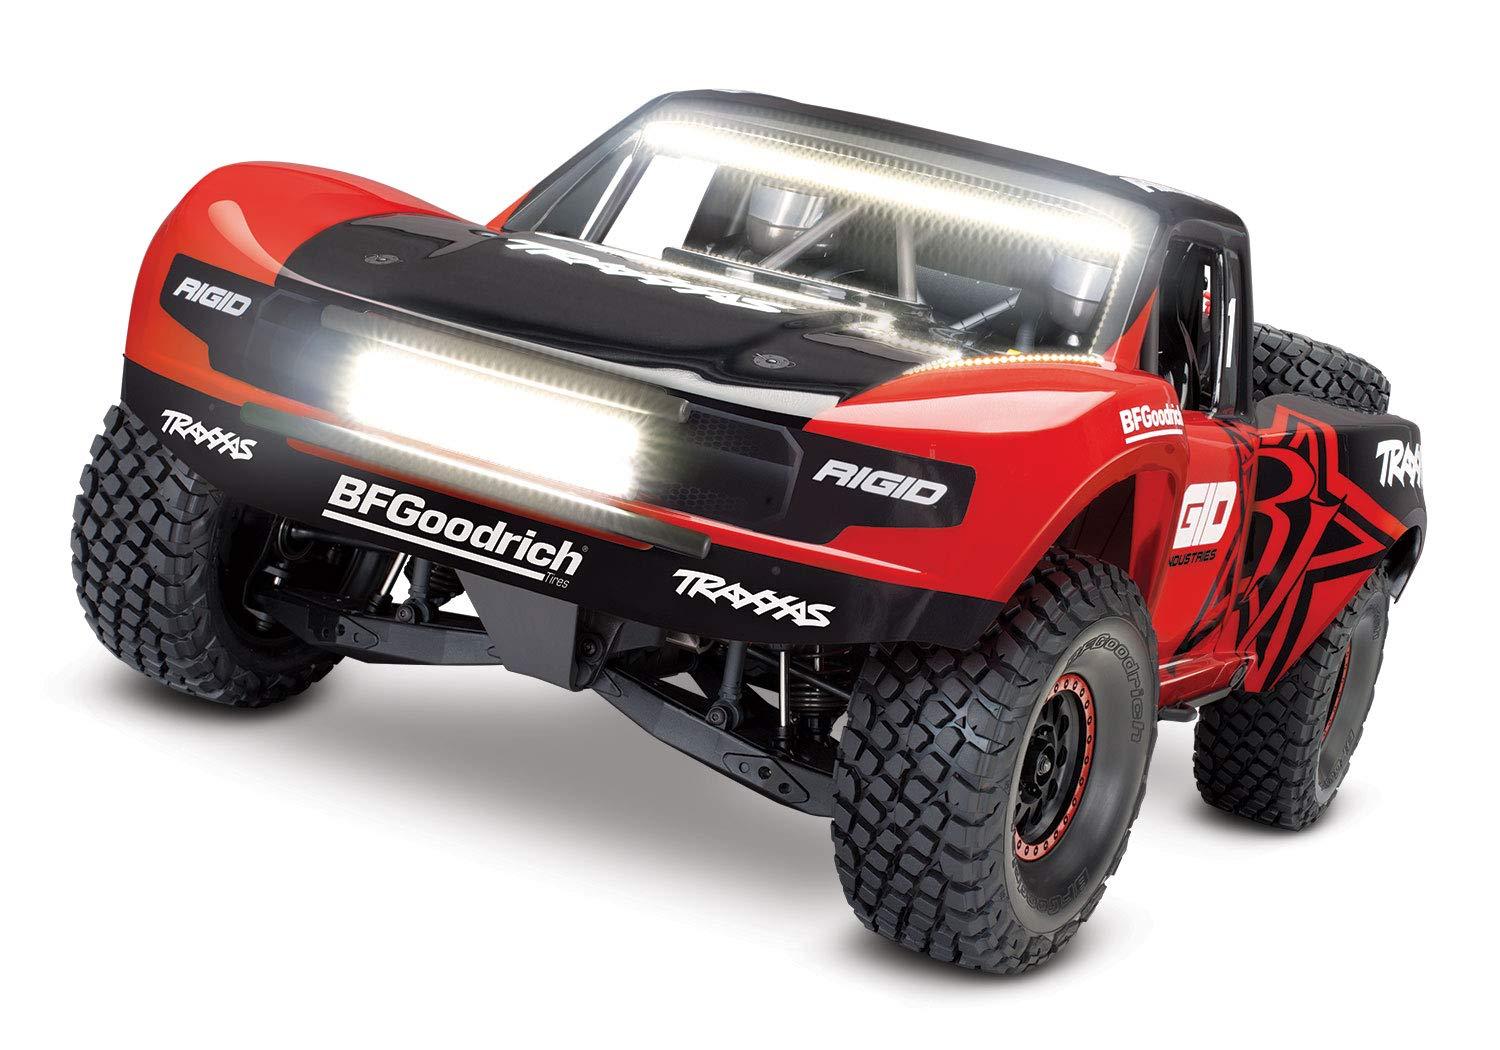 Traxxas Rc Cars Under $50: Budget-friendly Traxxas RC cars for endless indoor and outdoor fun.